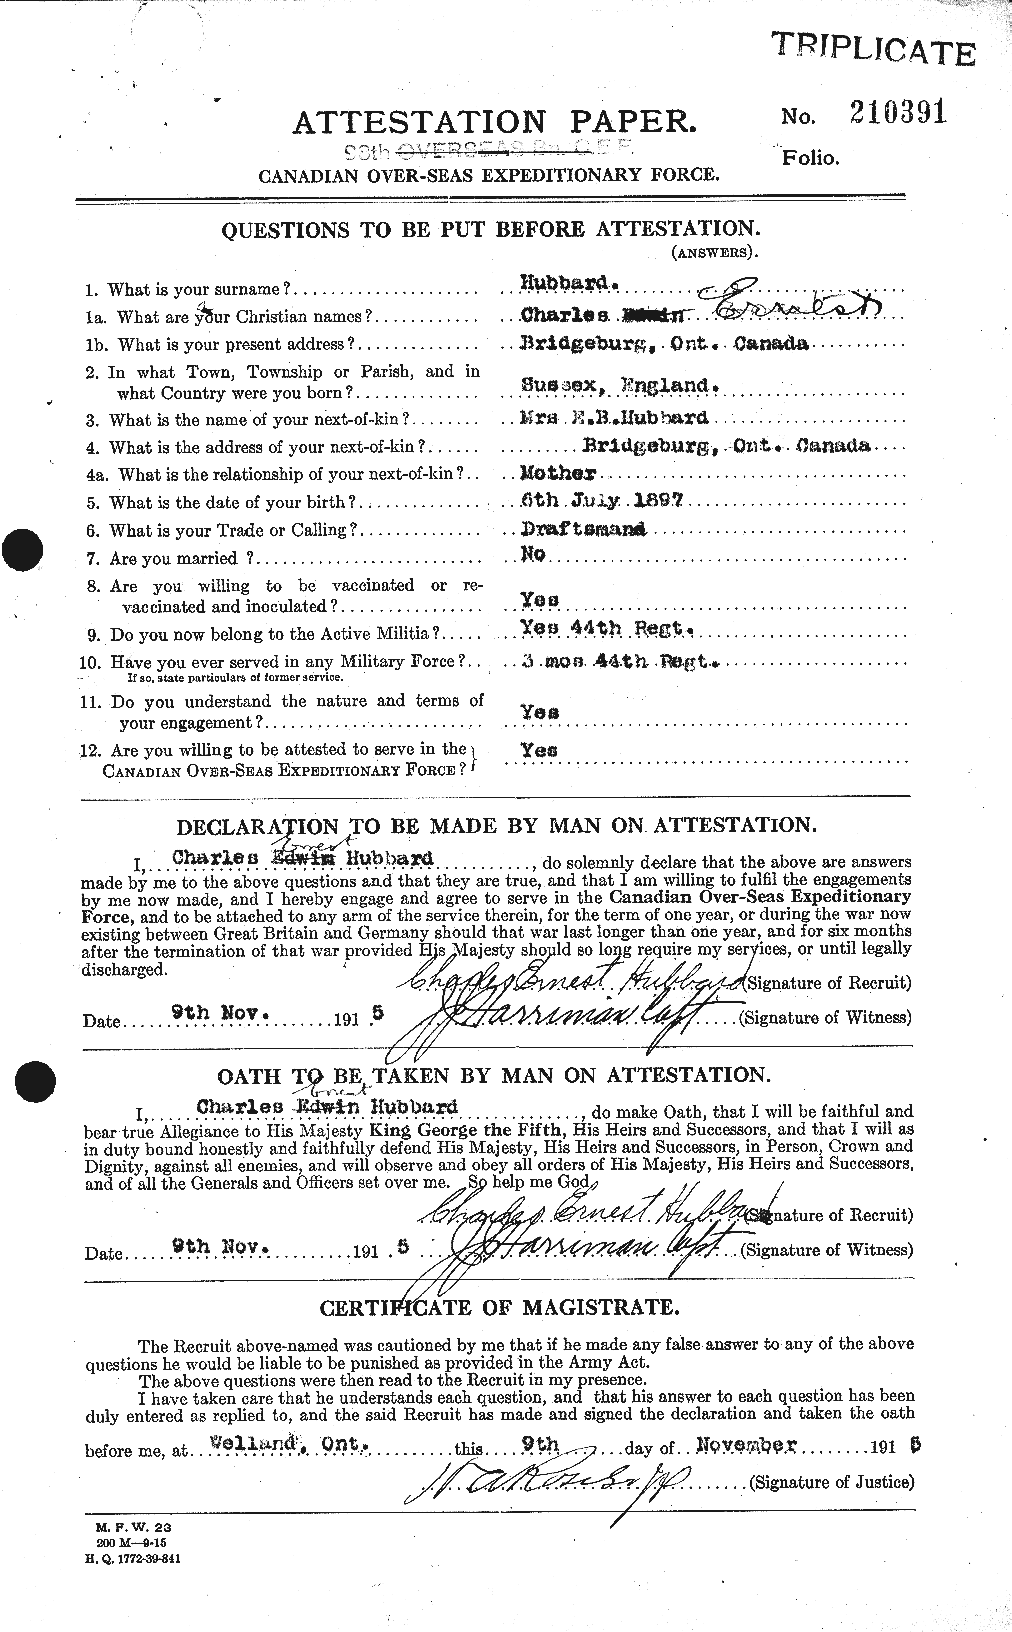 Personnel Records of the First World War - CEF 403706a